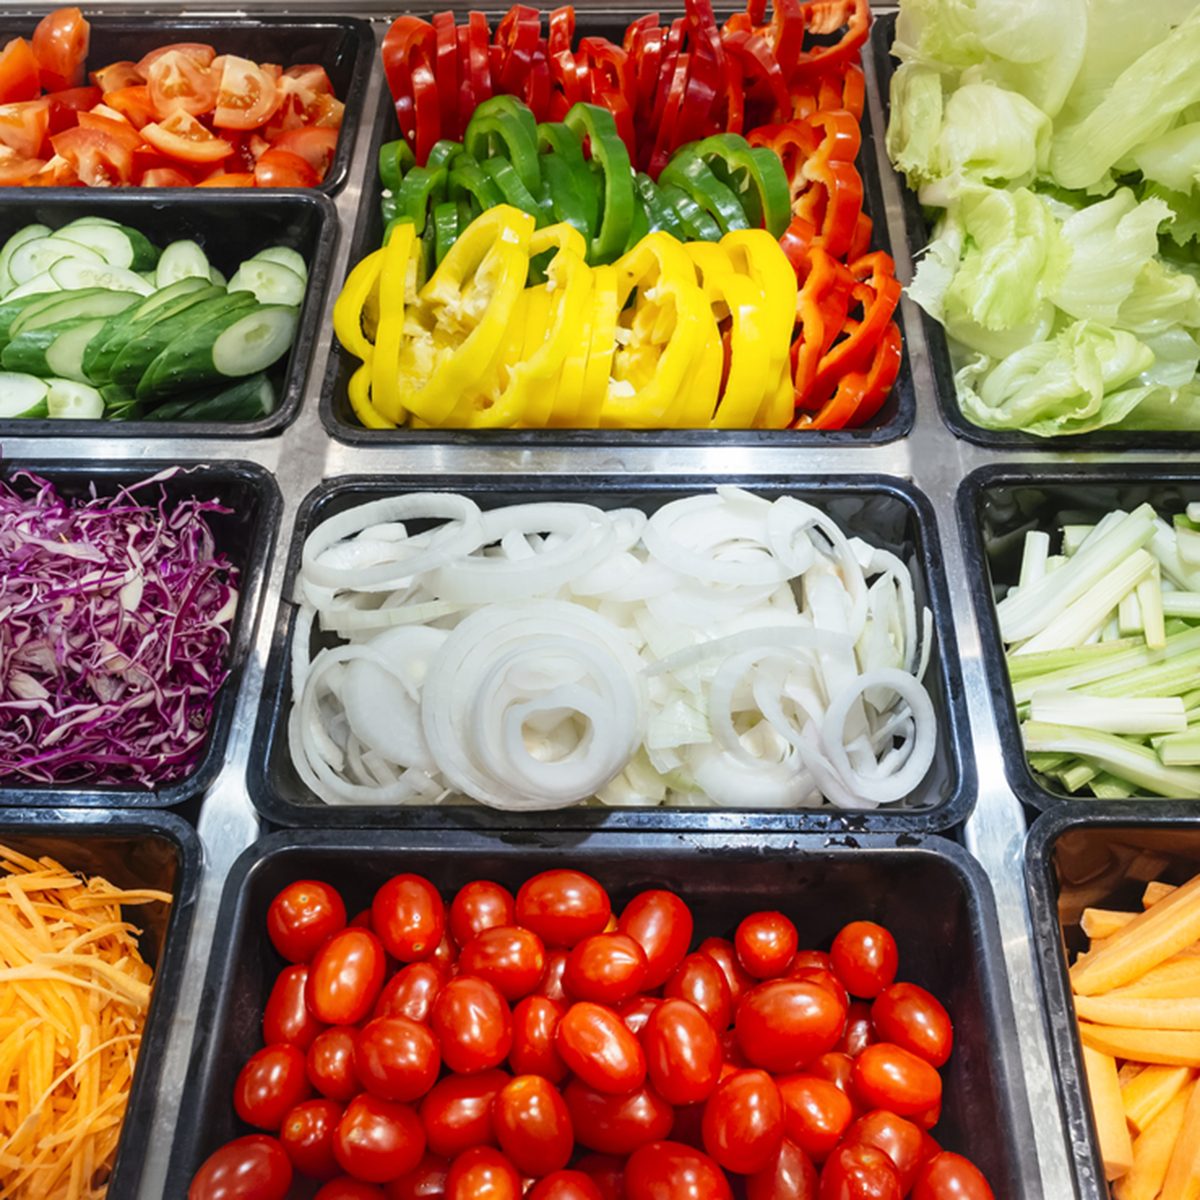 How to Make the Most of Your Supermarket Salad Bar | Taste of Home